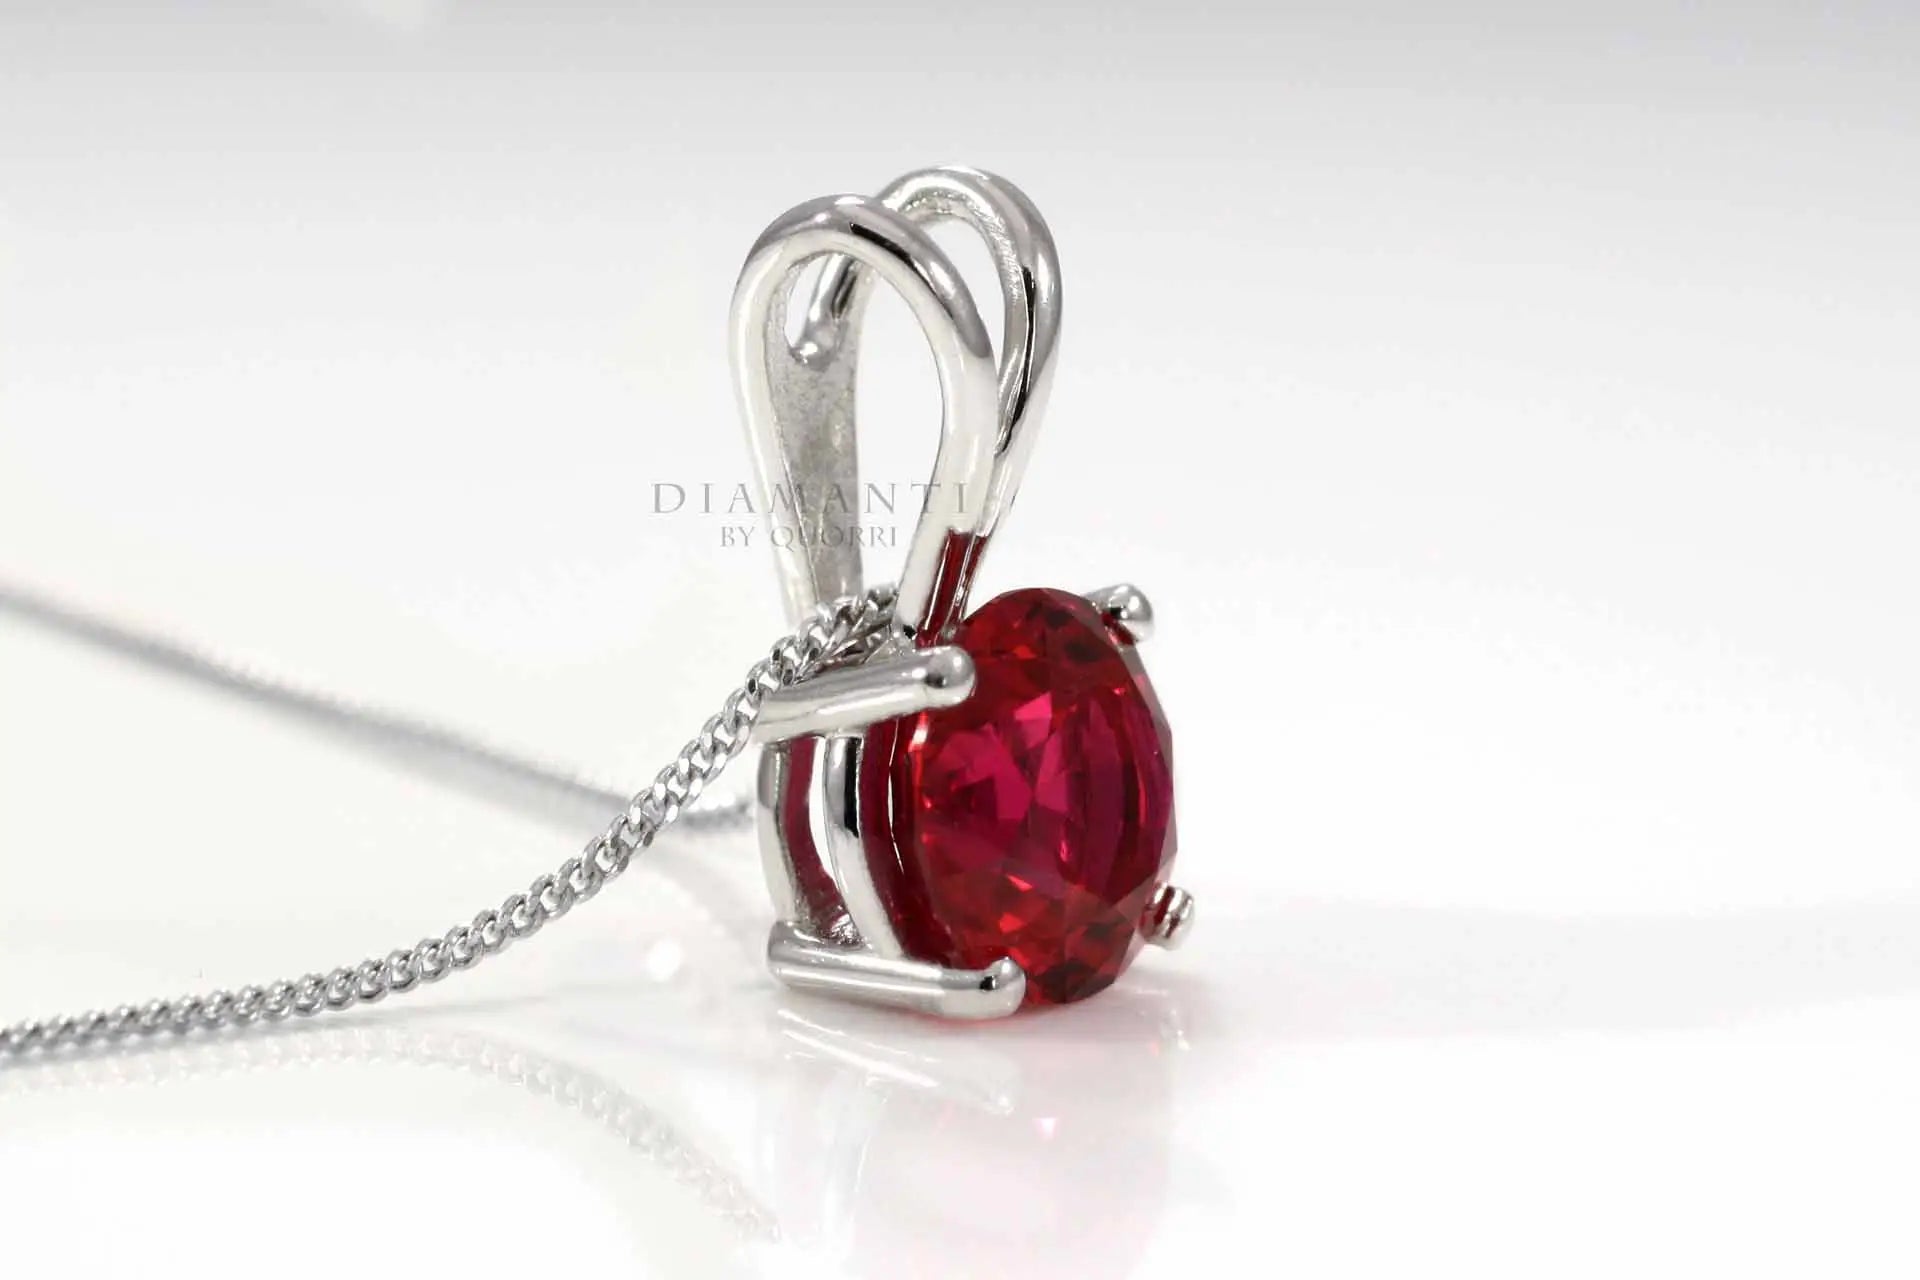 14k white gold blood red ruby solitare necklace pendant Quorri